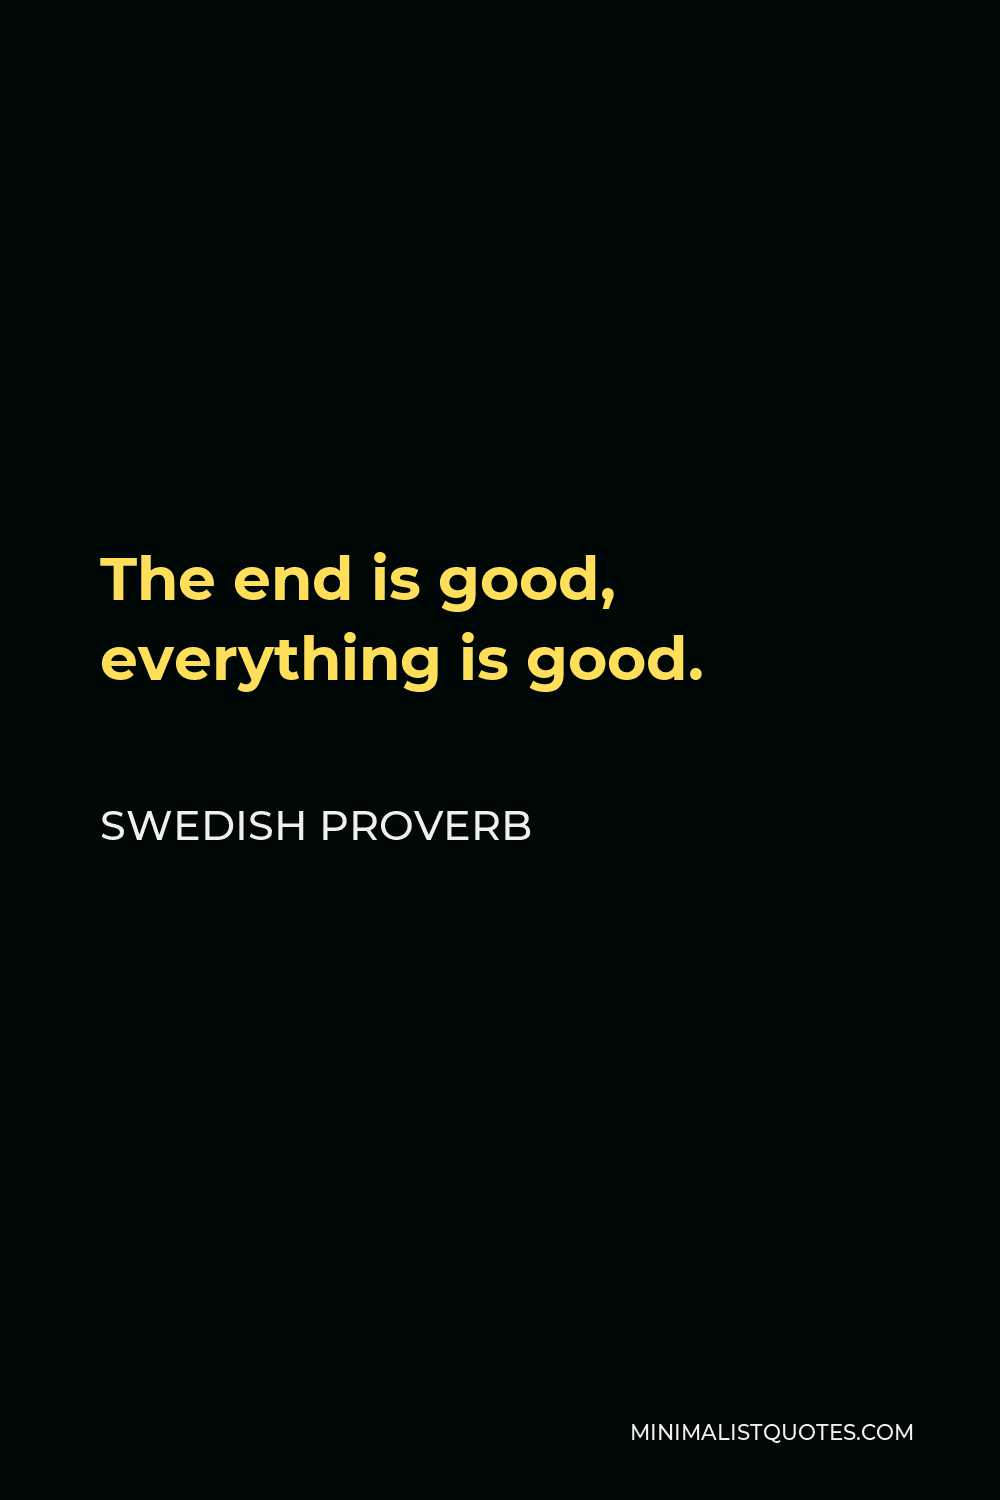 Swedish Proverb Quote - The end is good, everything is good.